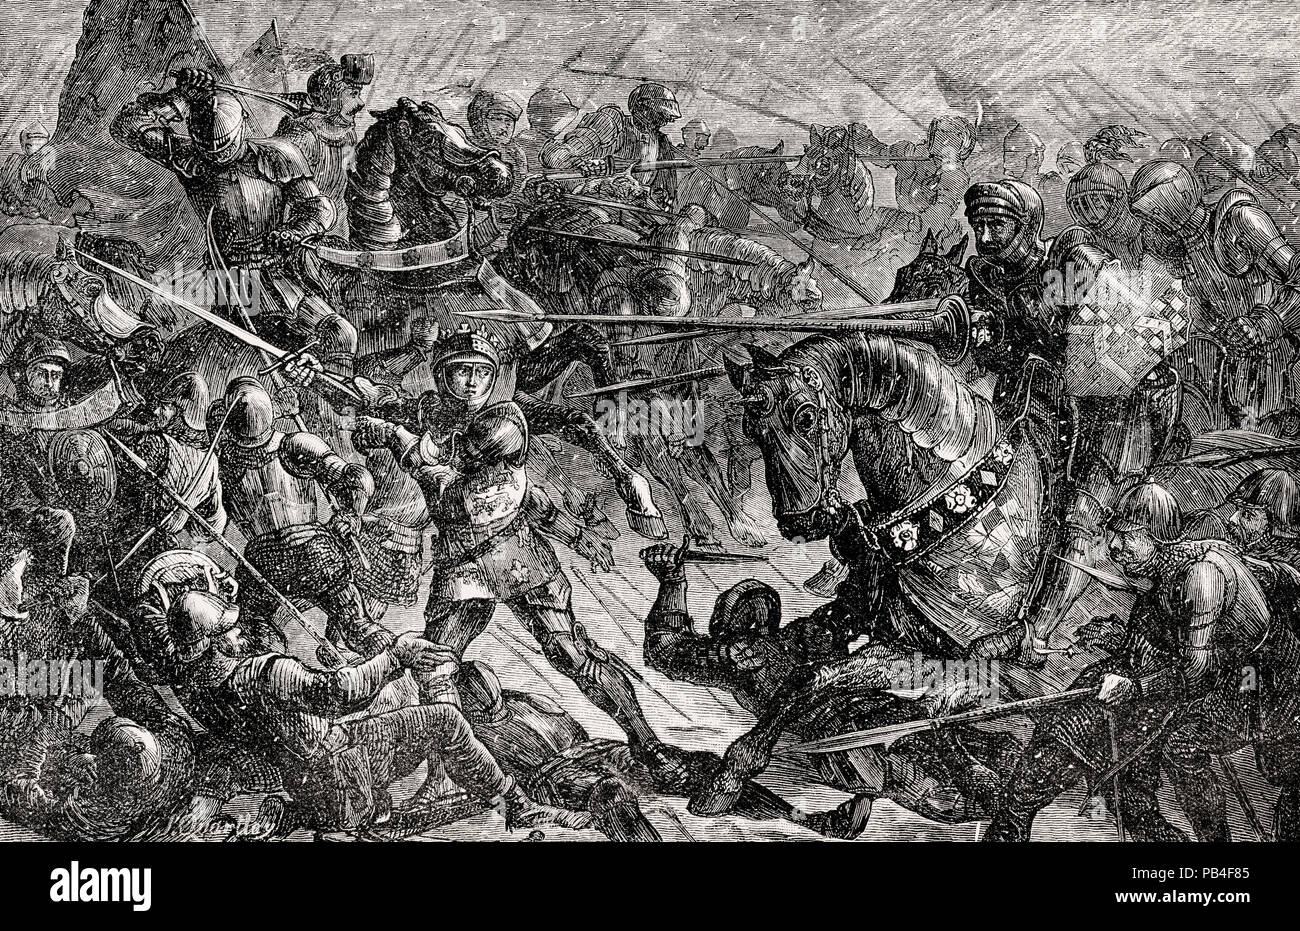 The Battle of Towton on 29th March 1461, Wars of the Roses, From British Battles on Land and Sea, by James Grant Stock Photo